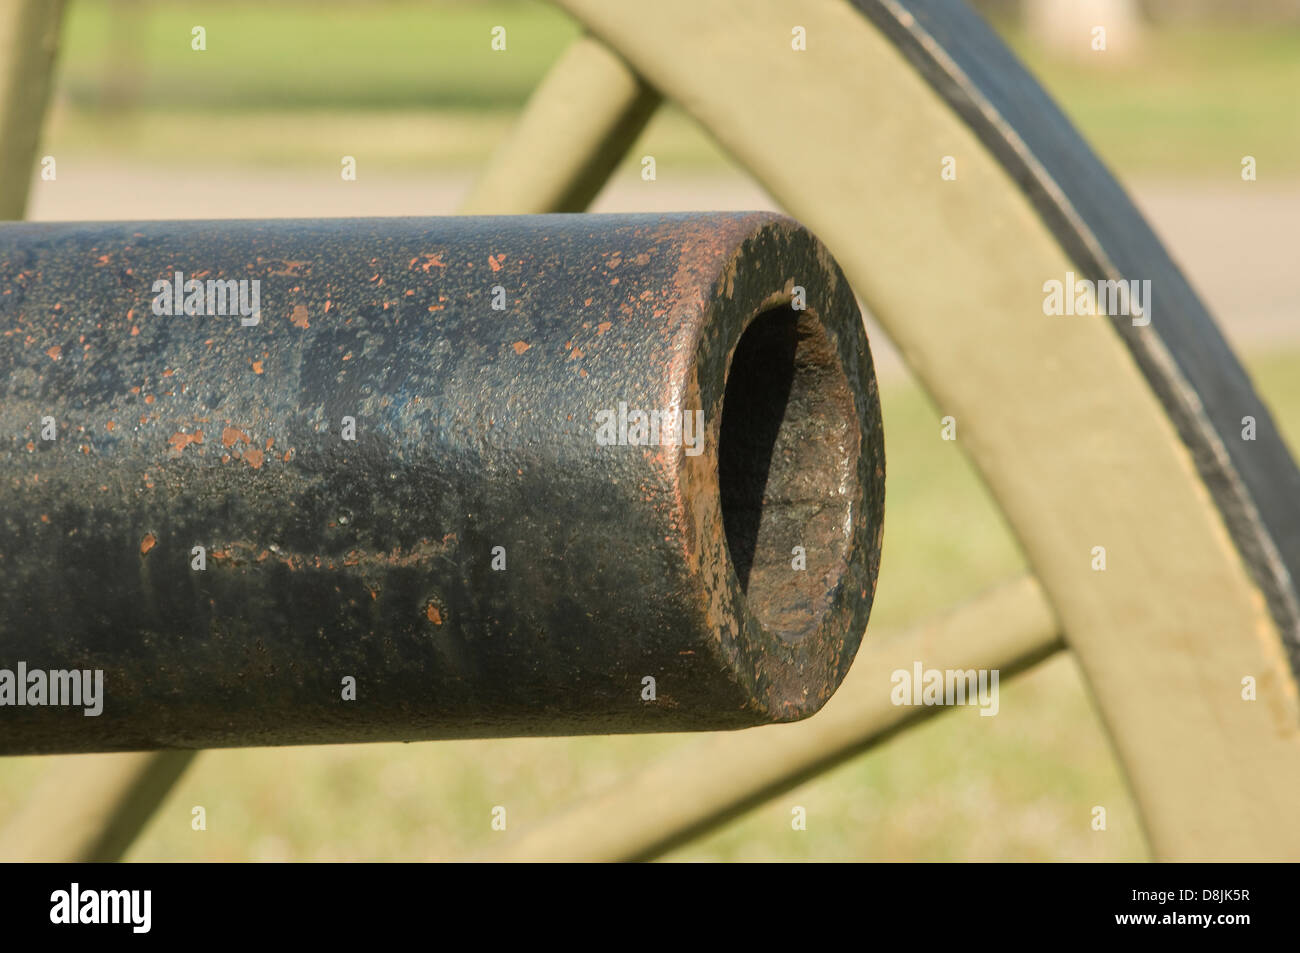 12-pounder Blakely rifled artillery, Shiloh National Military Park, Tennessee. Digital photograph Stock Photo